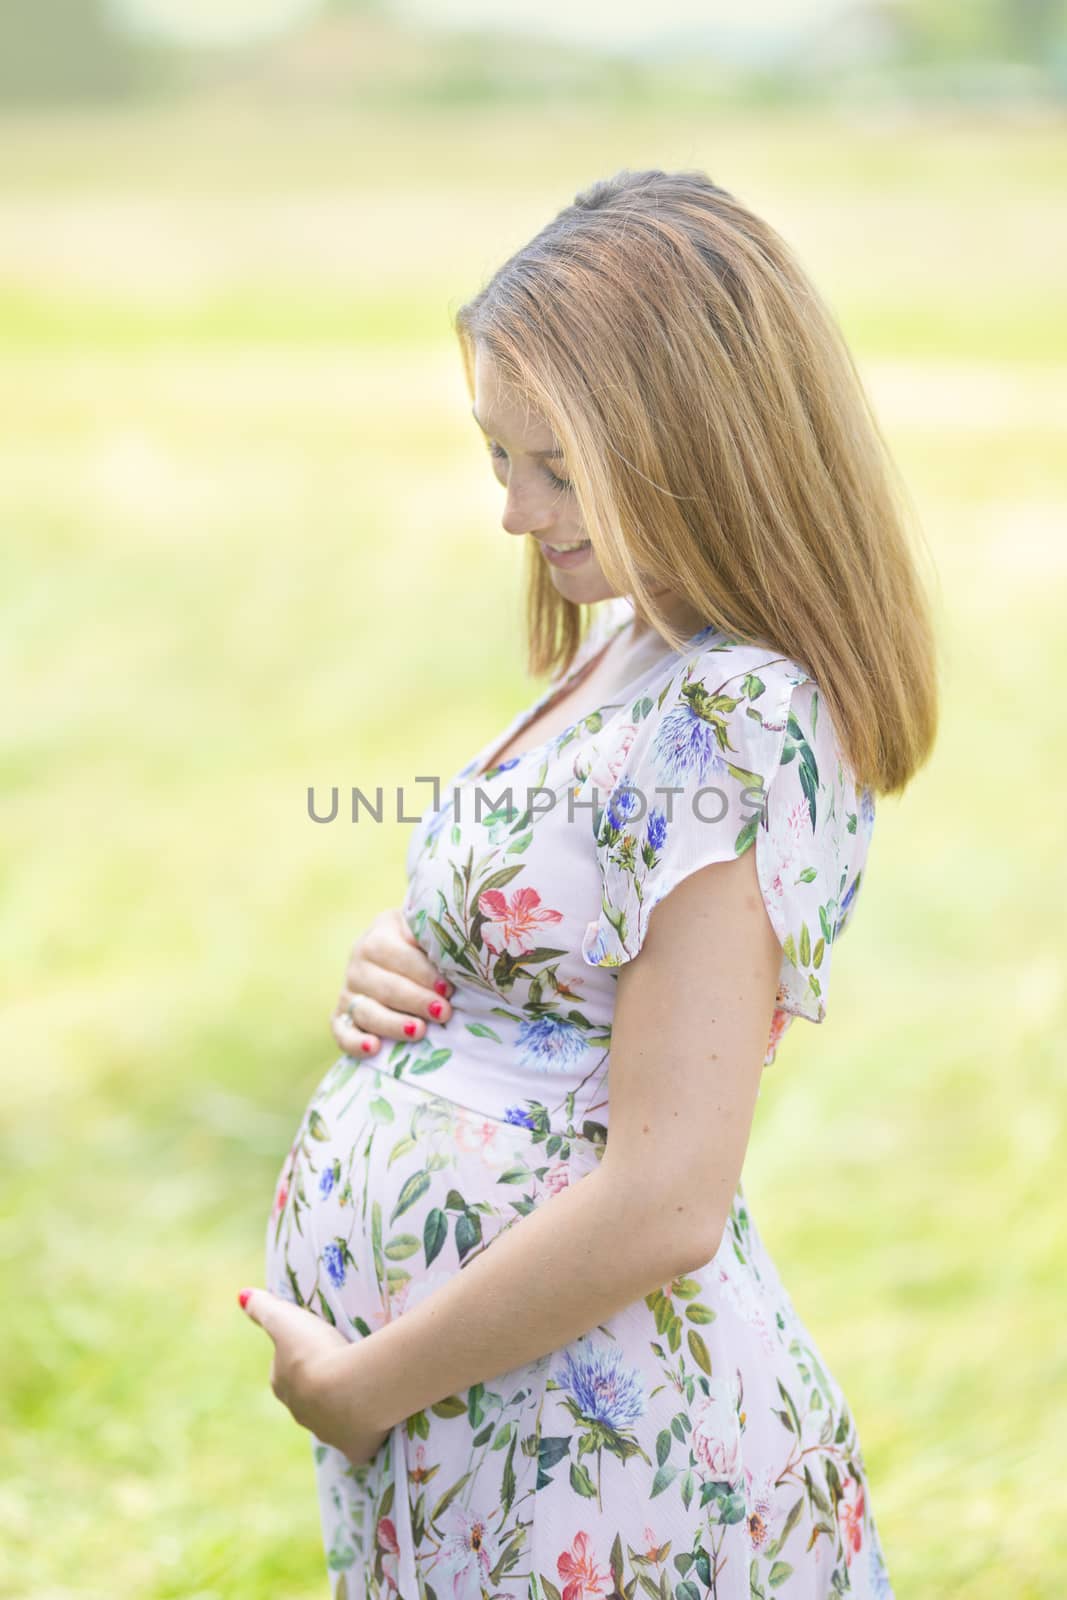 Portrait of beautiful pregnant woman in white summer dress relaxing in meadow full of yellow blooming flovers. Concept of healthy maternity care.